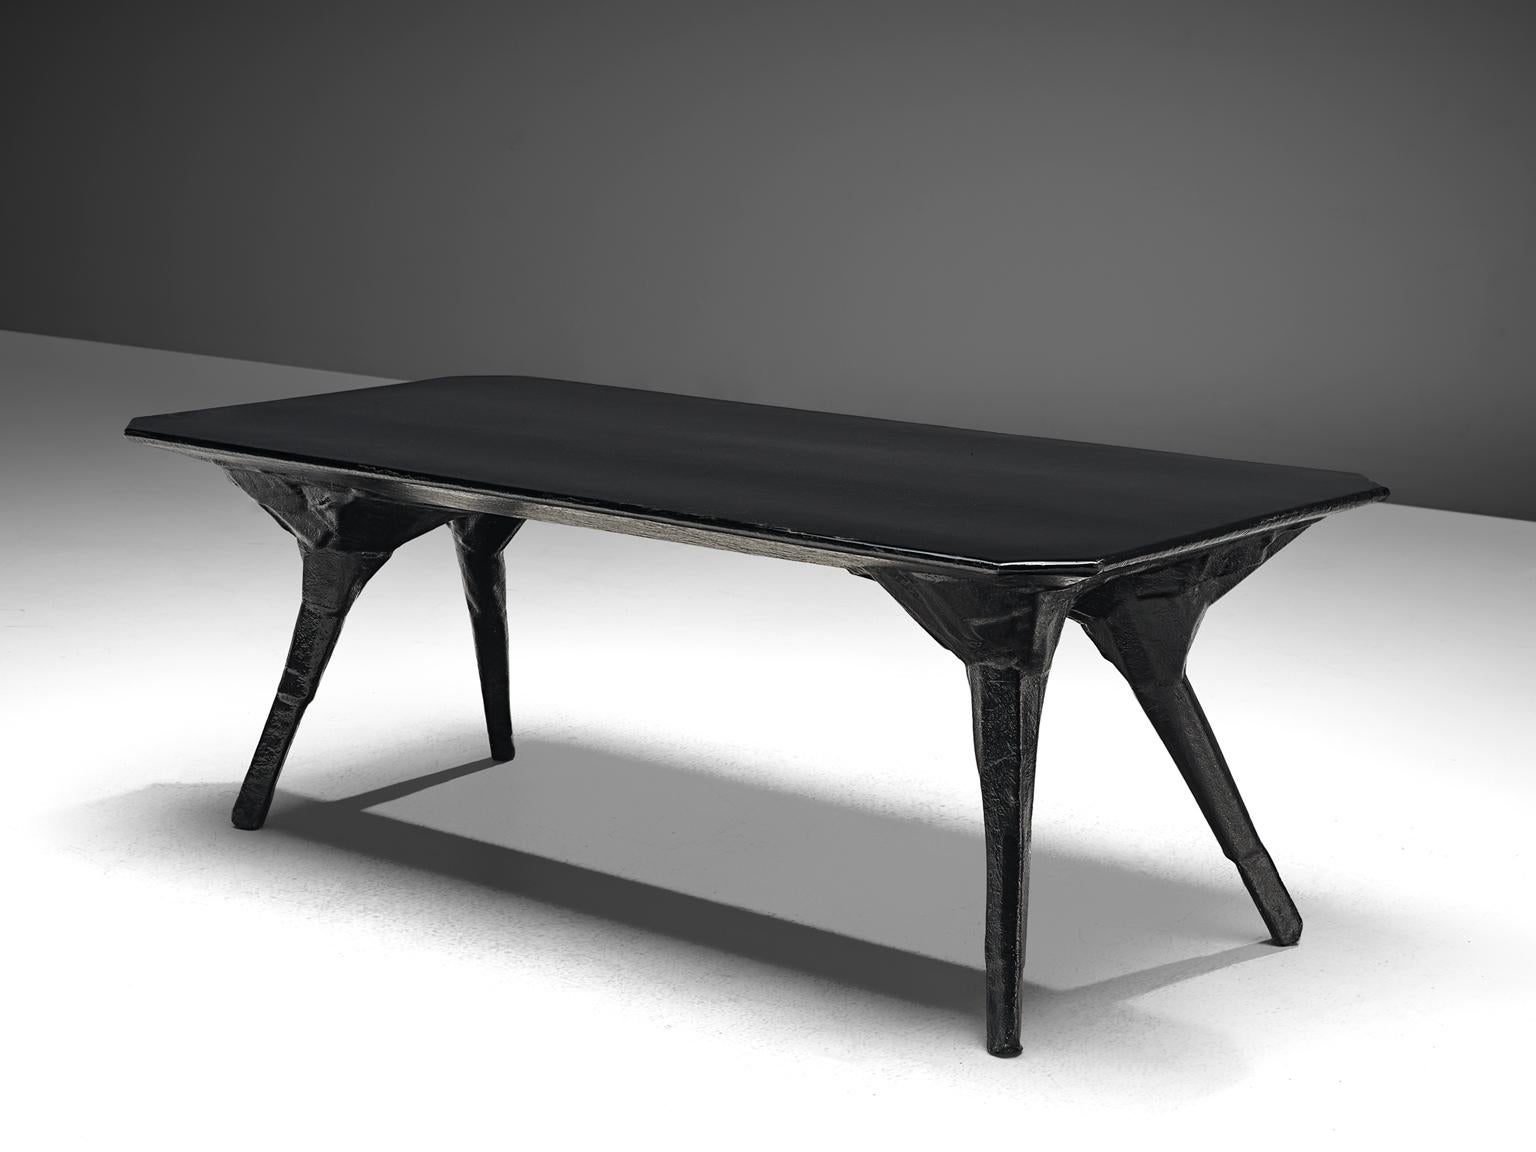 El Ultimo Grito, Free Range table, fiberglass, Spain, 2011.

The black Free-Range table by the Spanish contemporary design studio El Ultimo Grito, is a design that grew out of necessity. Feo and Hurtado were temporarily living in Berlin and needed a